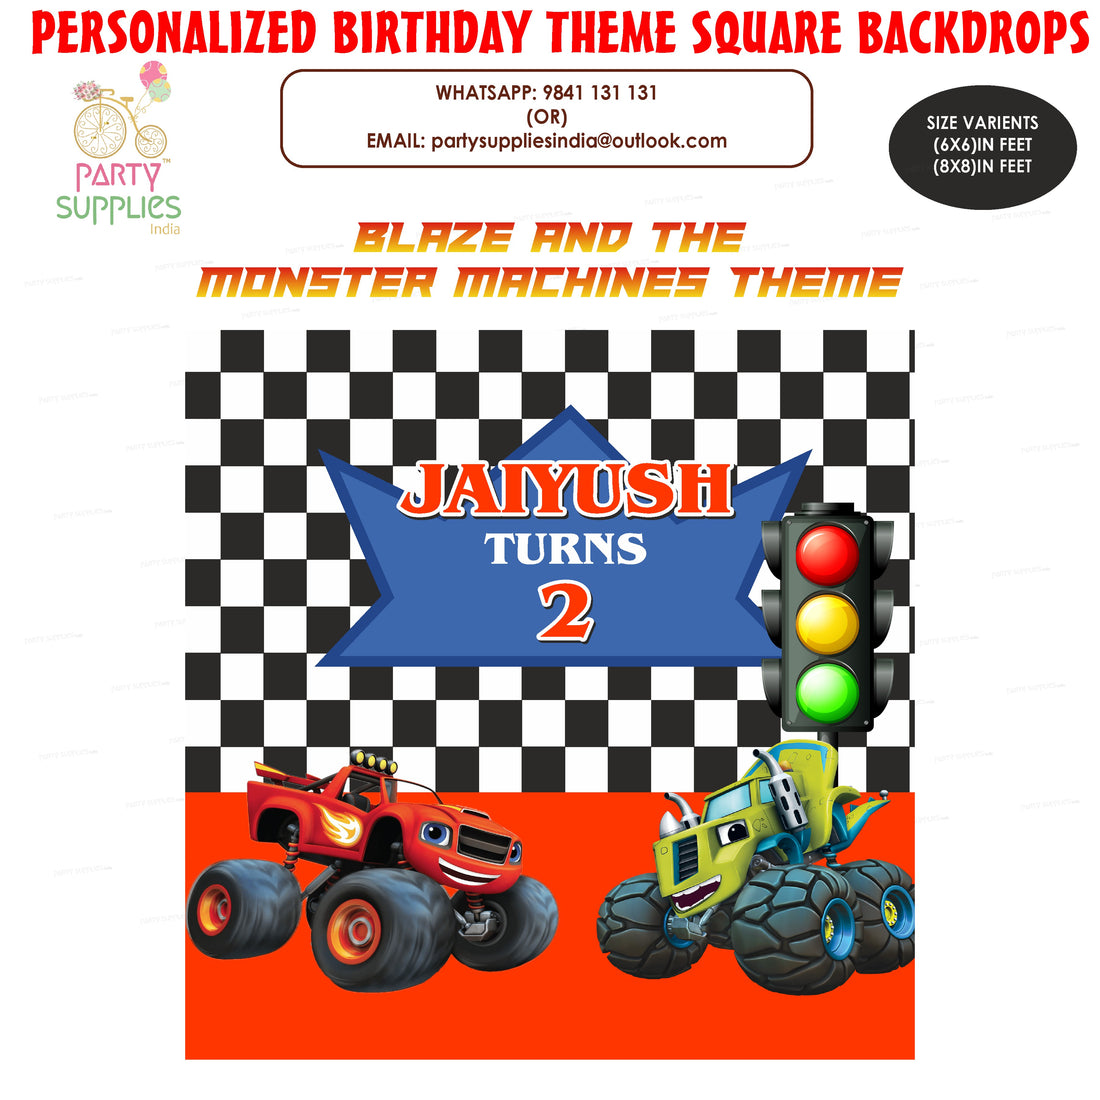 PSI Blaze and the Monster Machines Theme Personalized Square Backdrop